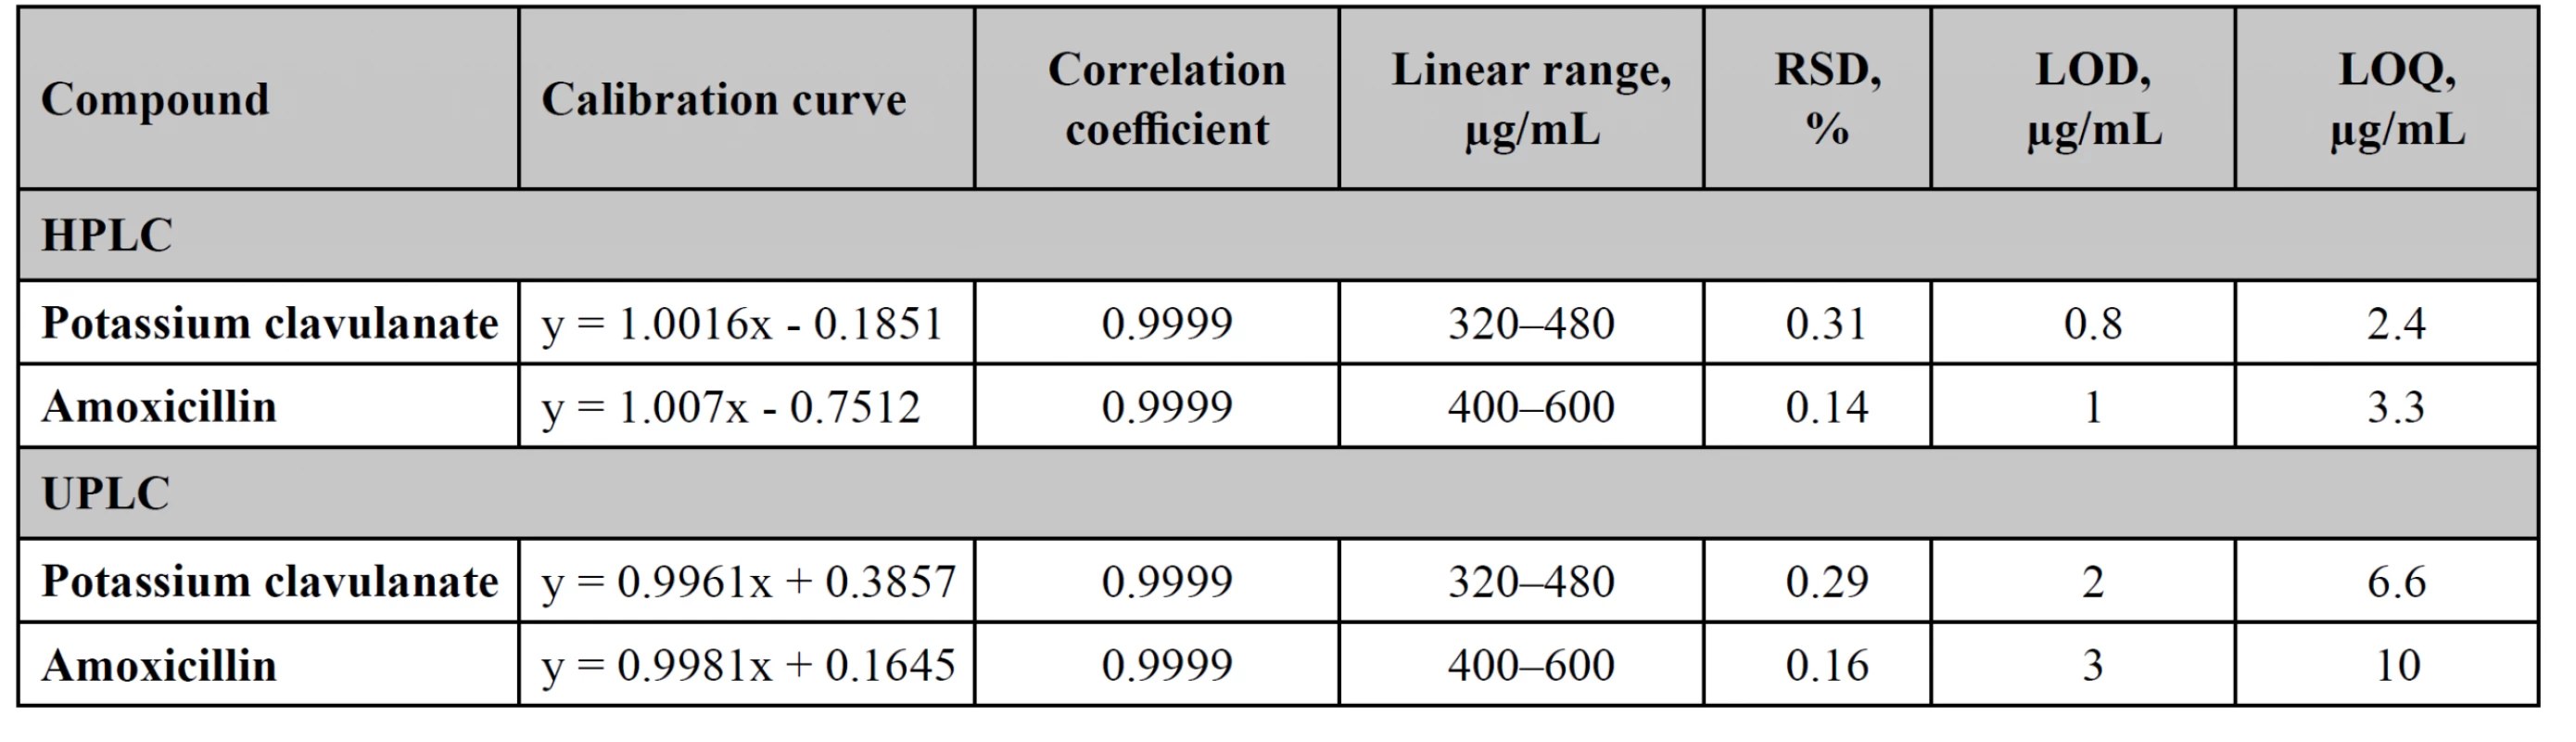 Linearity studies for HPLC and UPLC methods